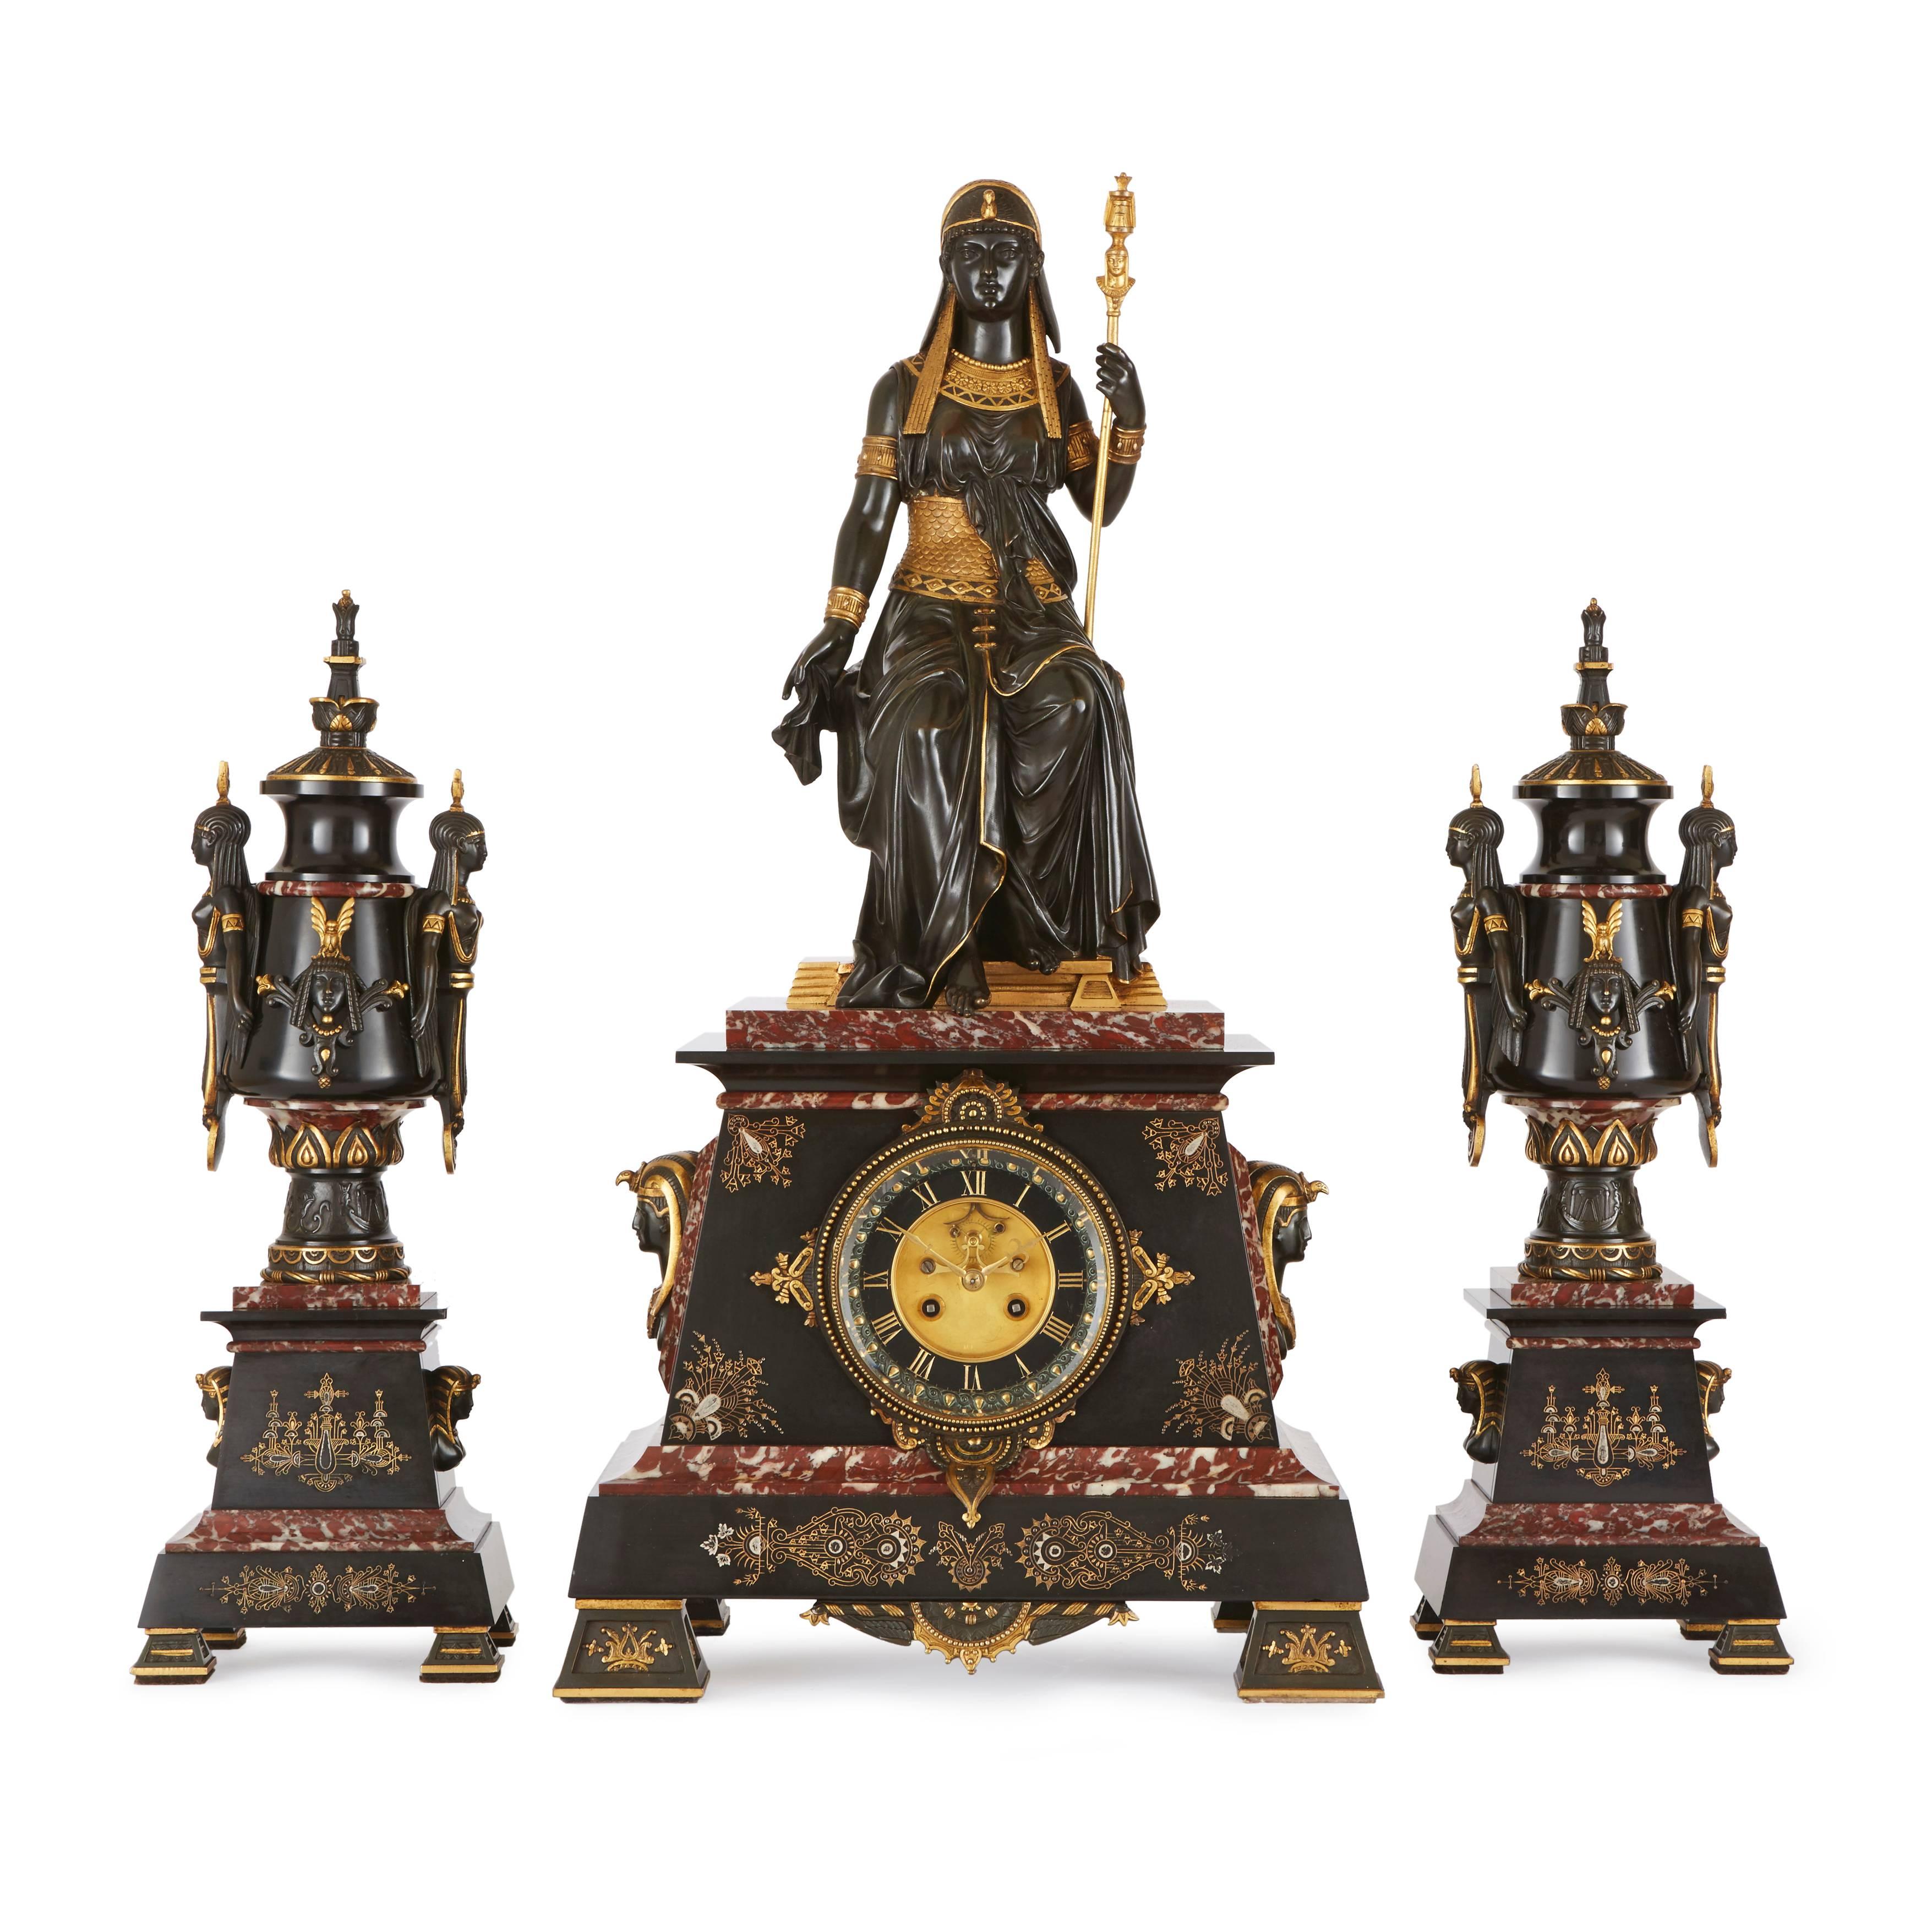 Attributed to Emile Herbert, French, 1828-1893.
Comprising a central clock and a pair of flanking lidded vases, the clock on a red and black marble base with Pharaoh busts on either side, surmounted with the Egyptian queen 'Isis' enthroned, the two